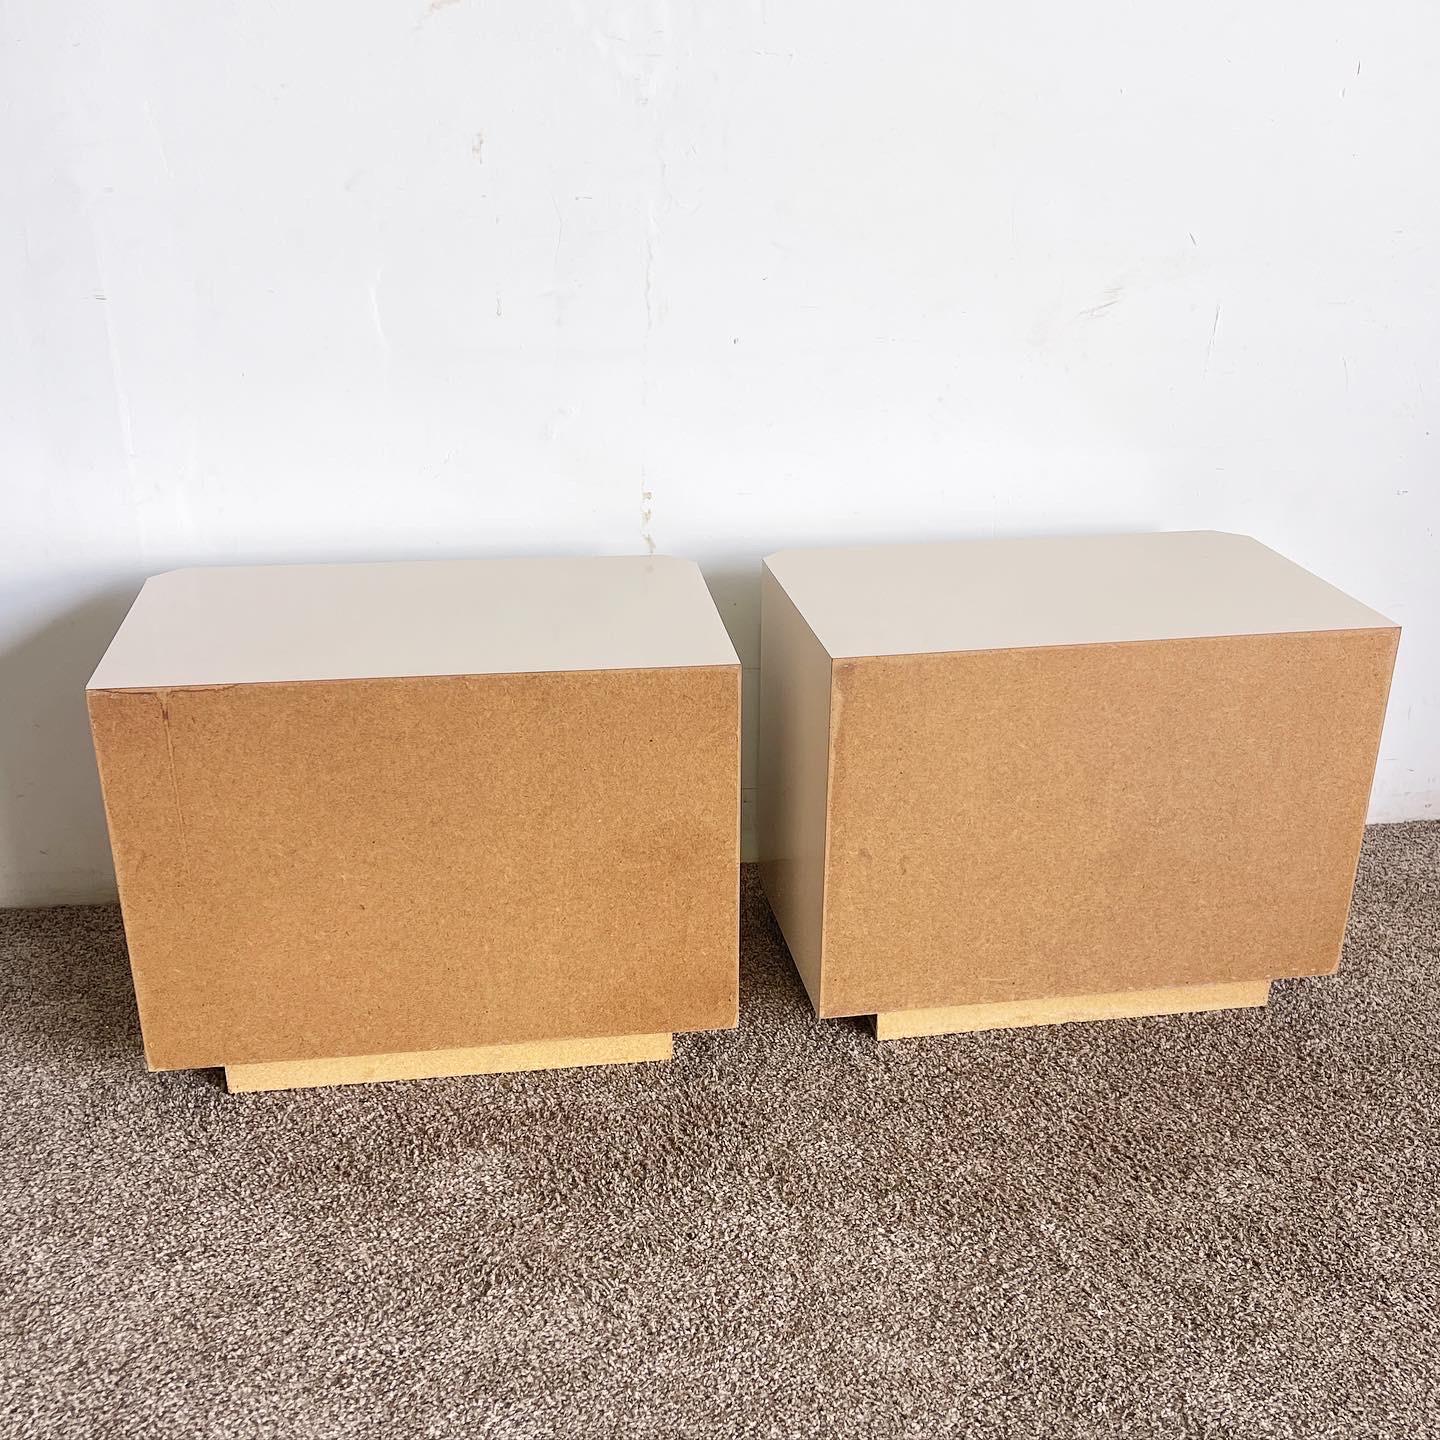 Late 20th Century Postmodern Beige Gold and Smoked Mirror Nightstands - a Pair For Sale